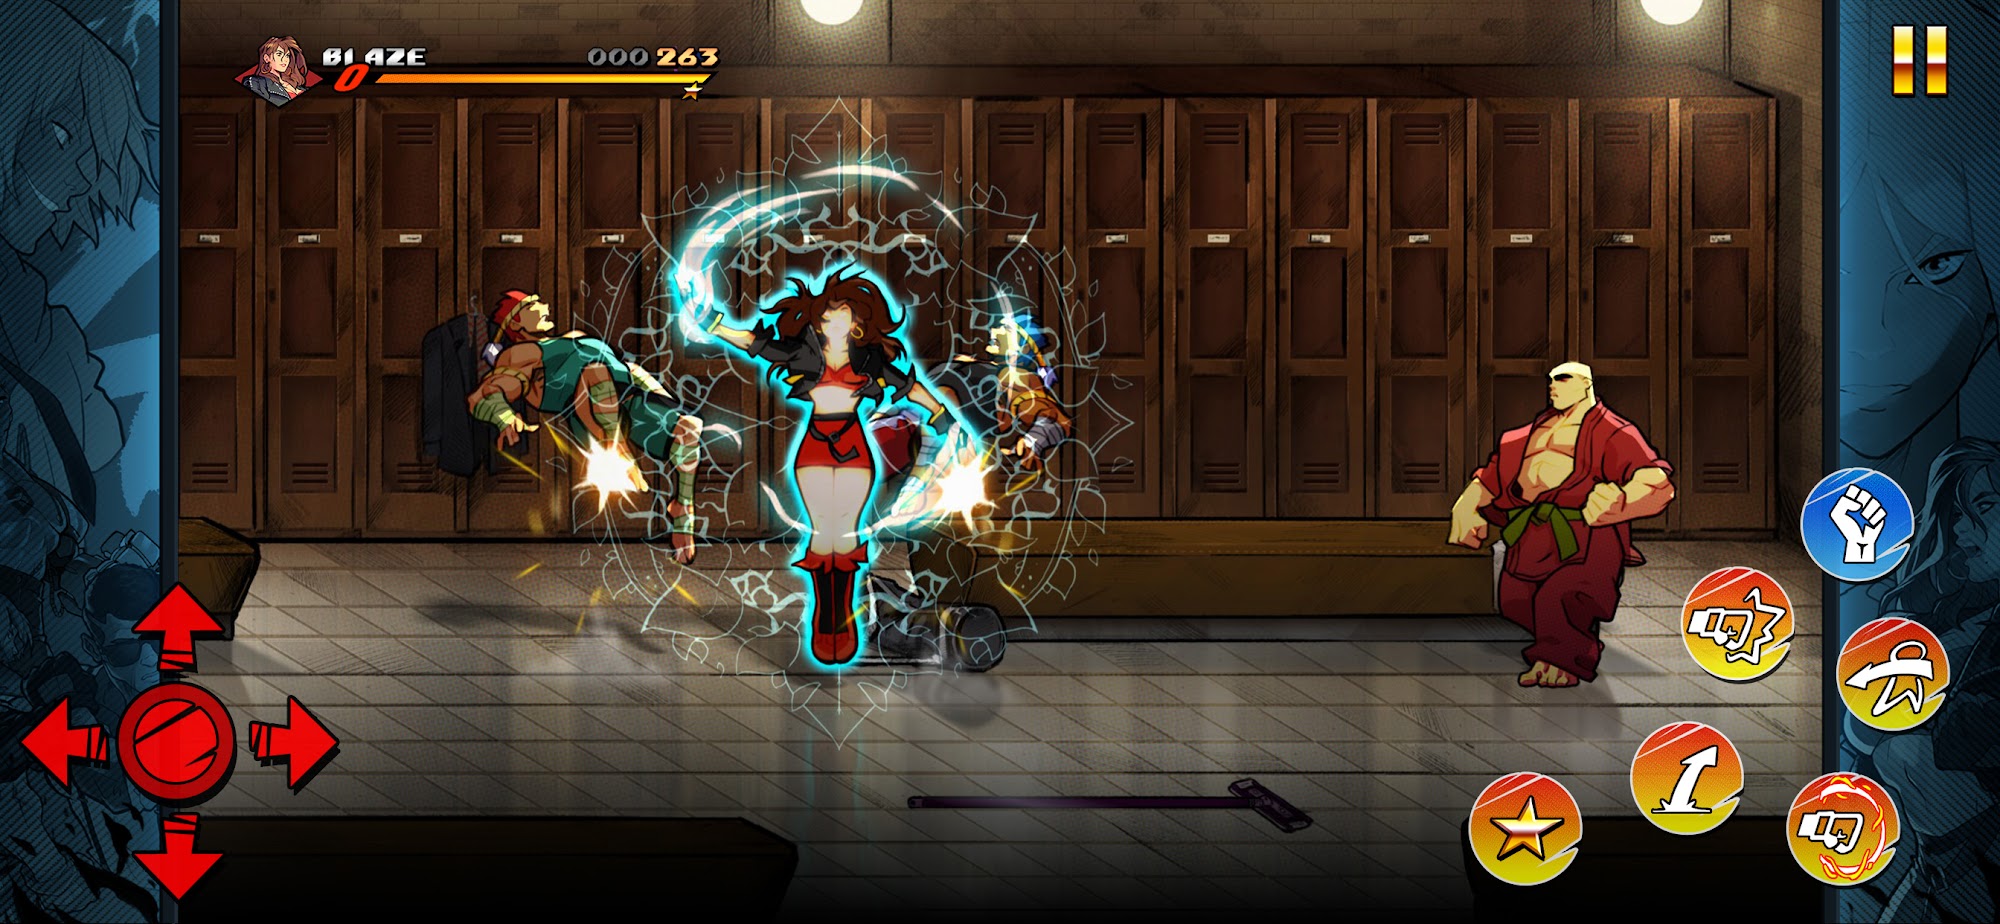 Streets of Rage 4 - Android game screenshots.